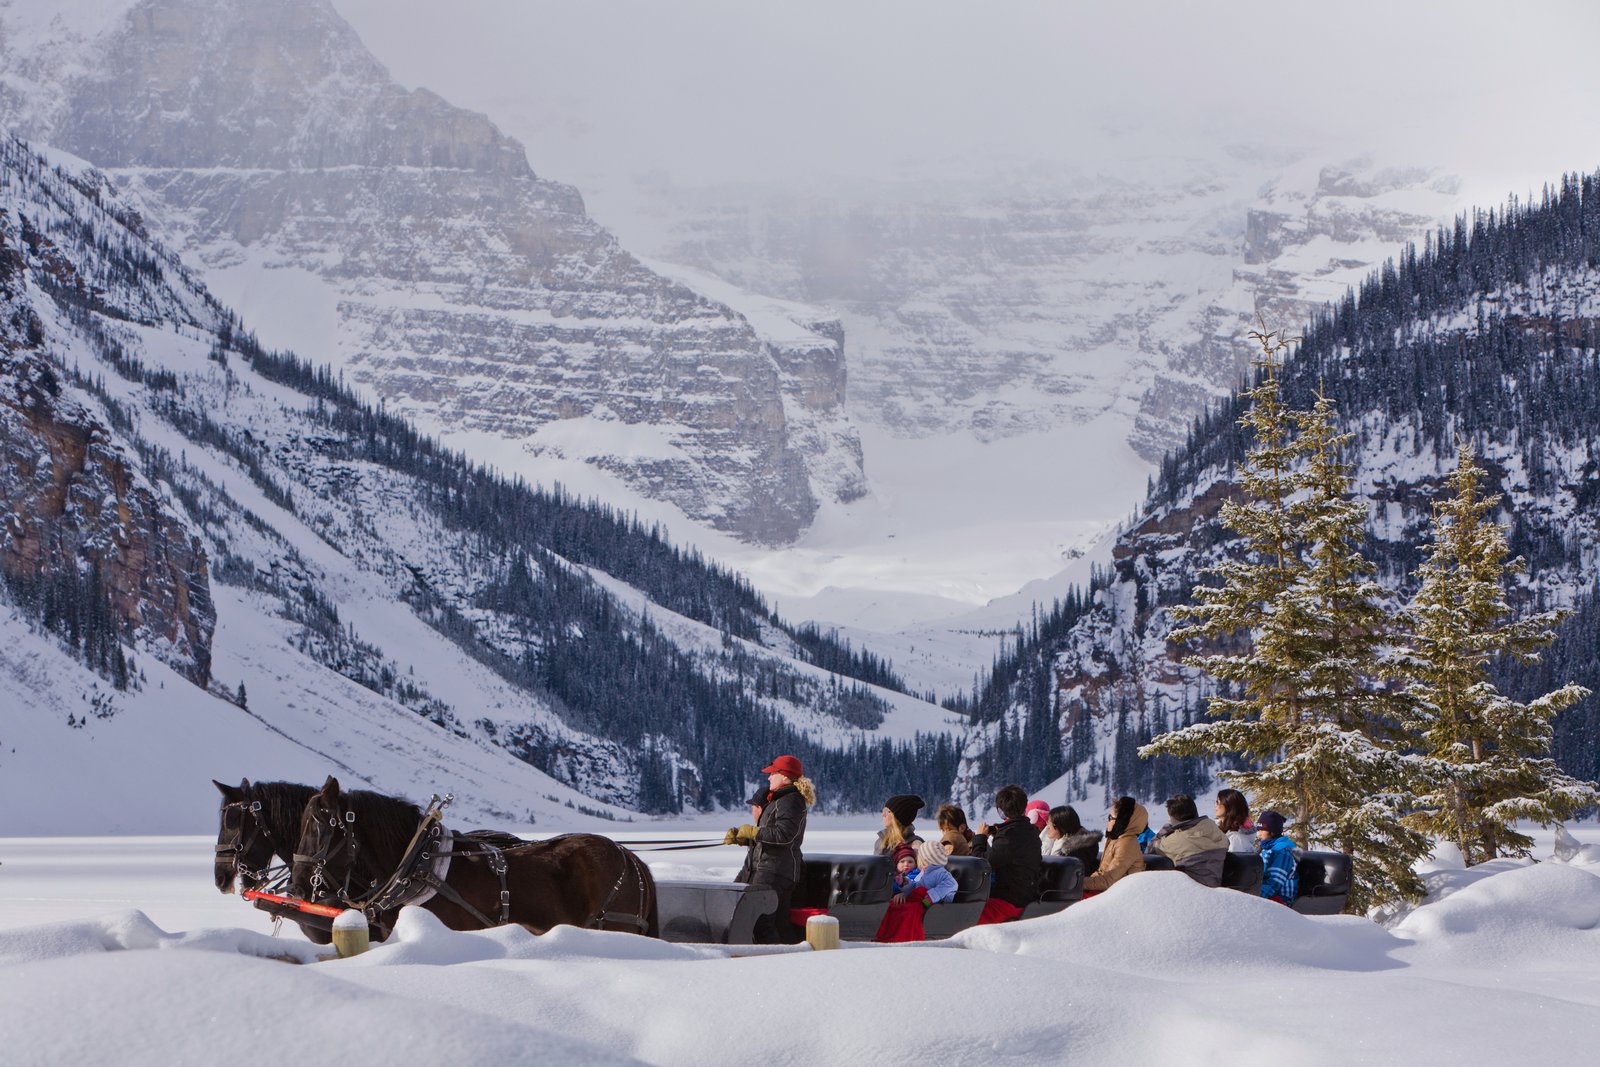 A group of people on a winter's day enjoying a horse drawn sleigh ride with mountains in the background.